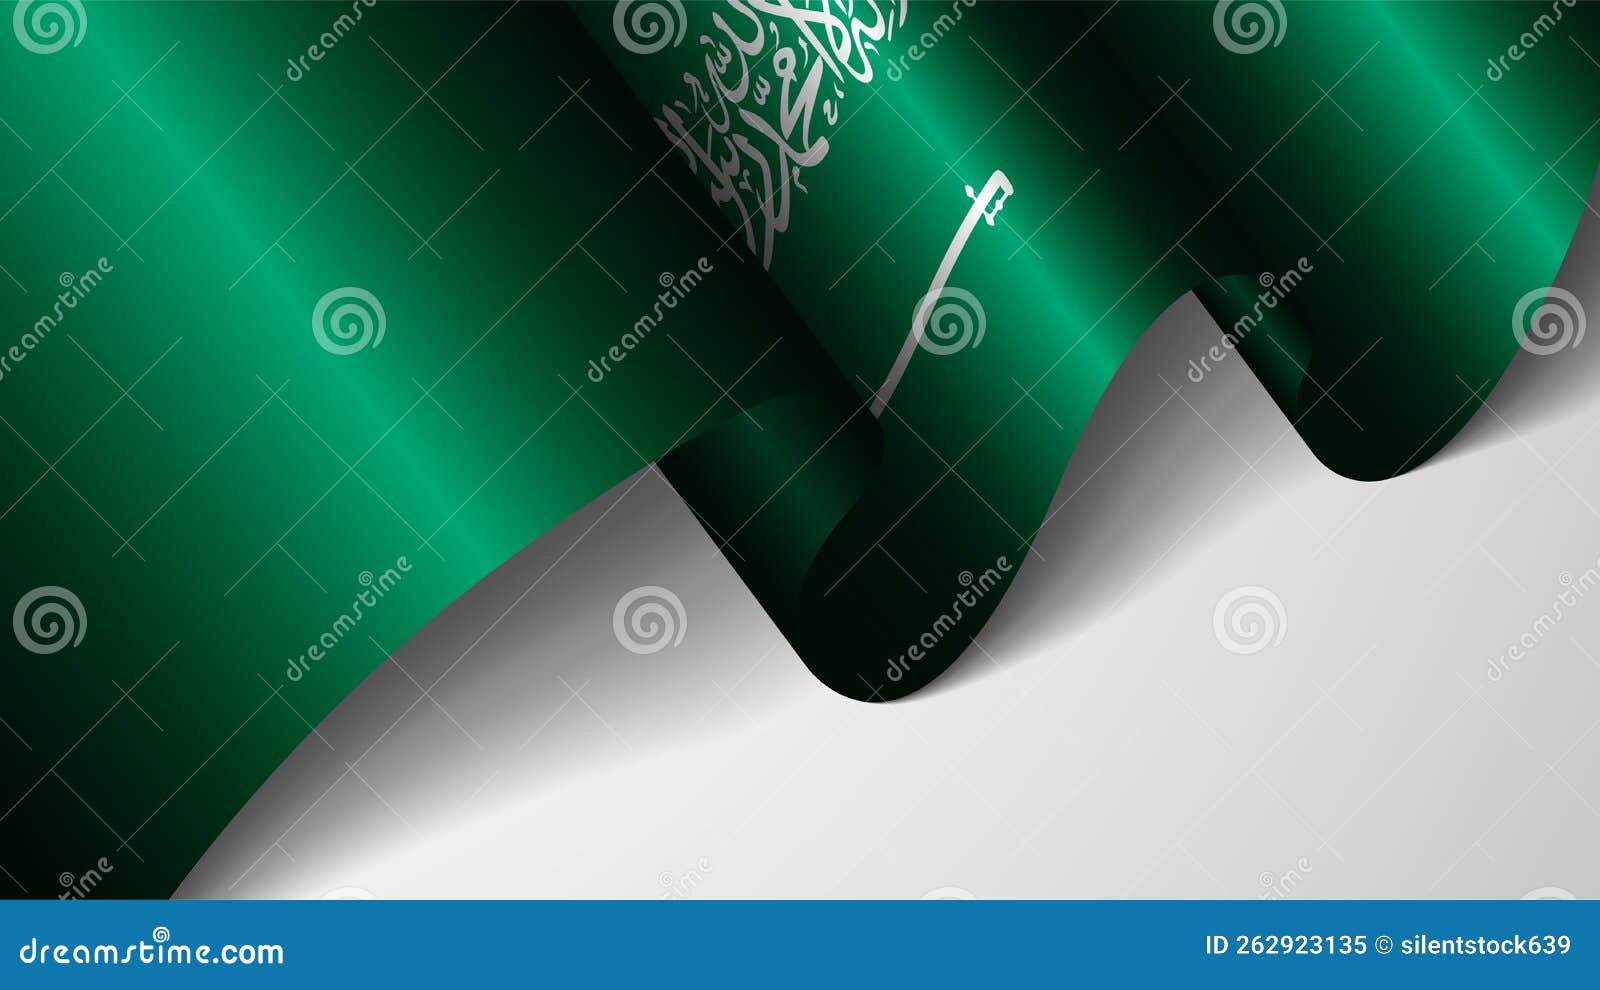 eps10  patriotic background with flag of saudiarabia.